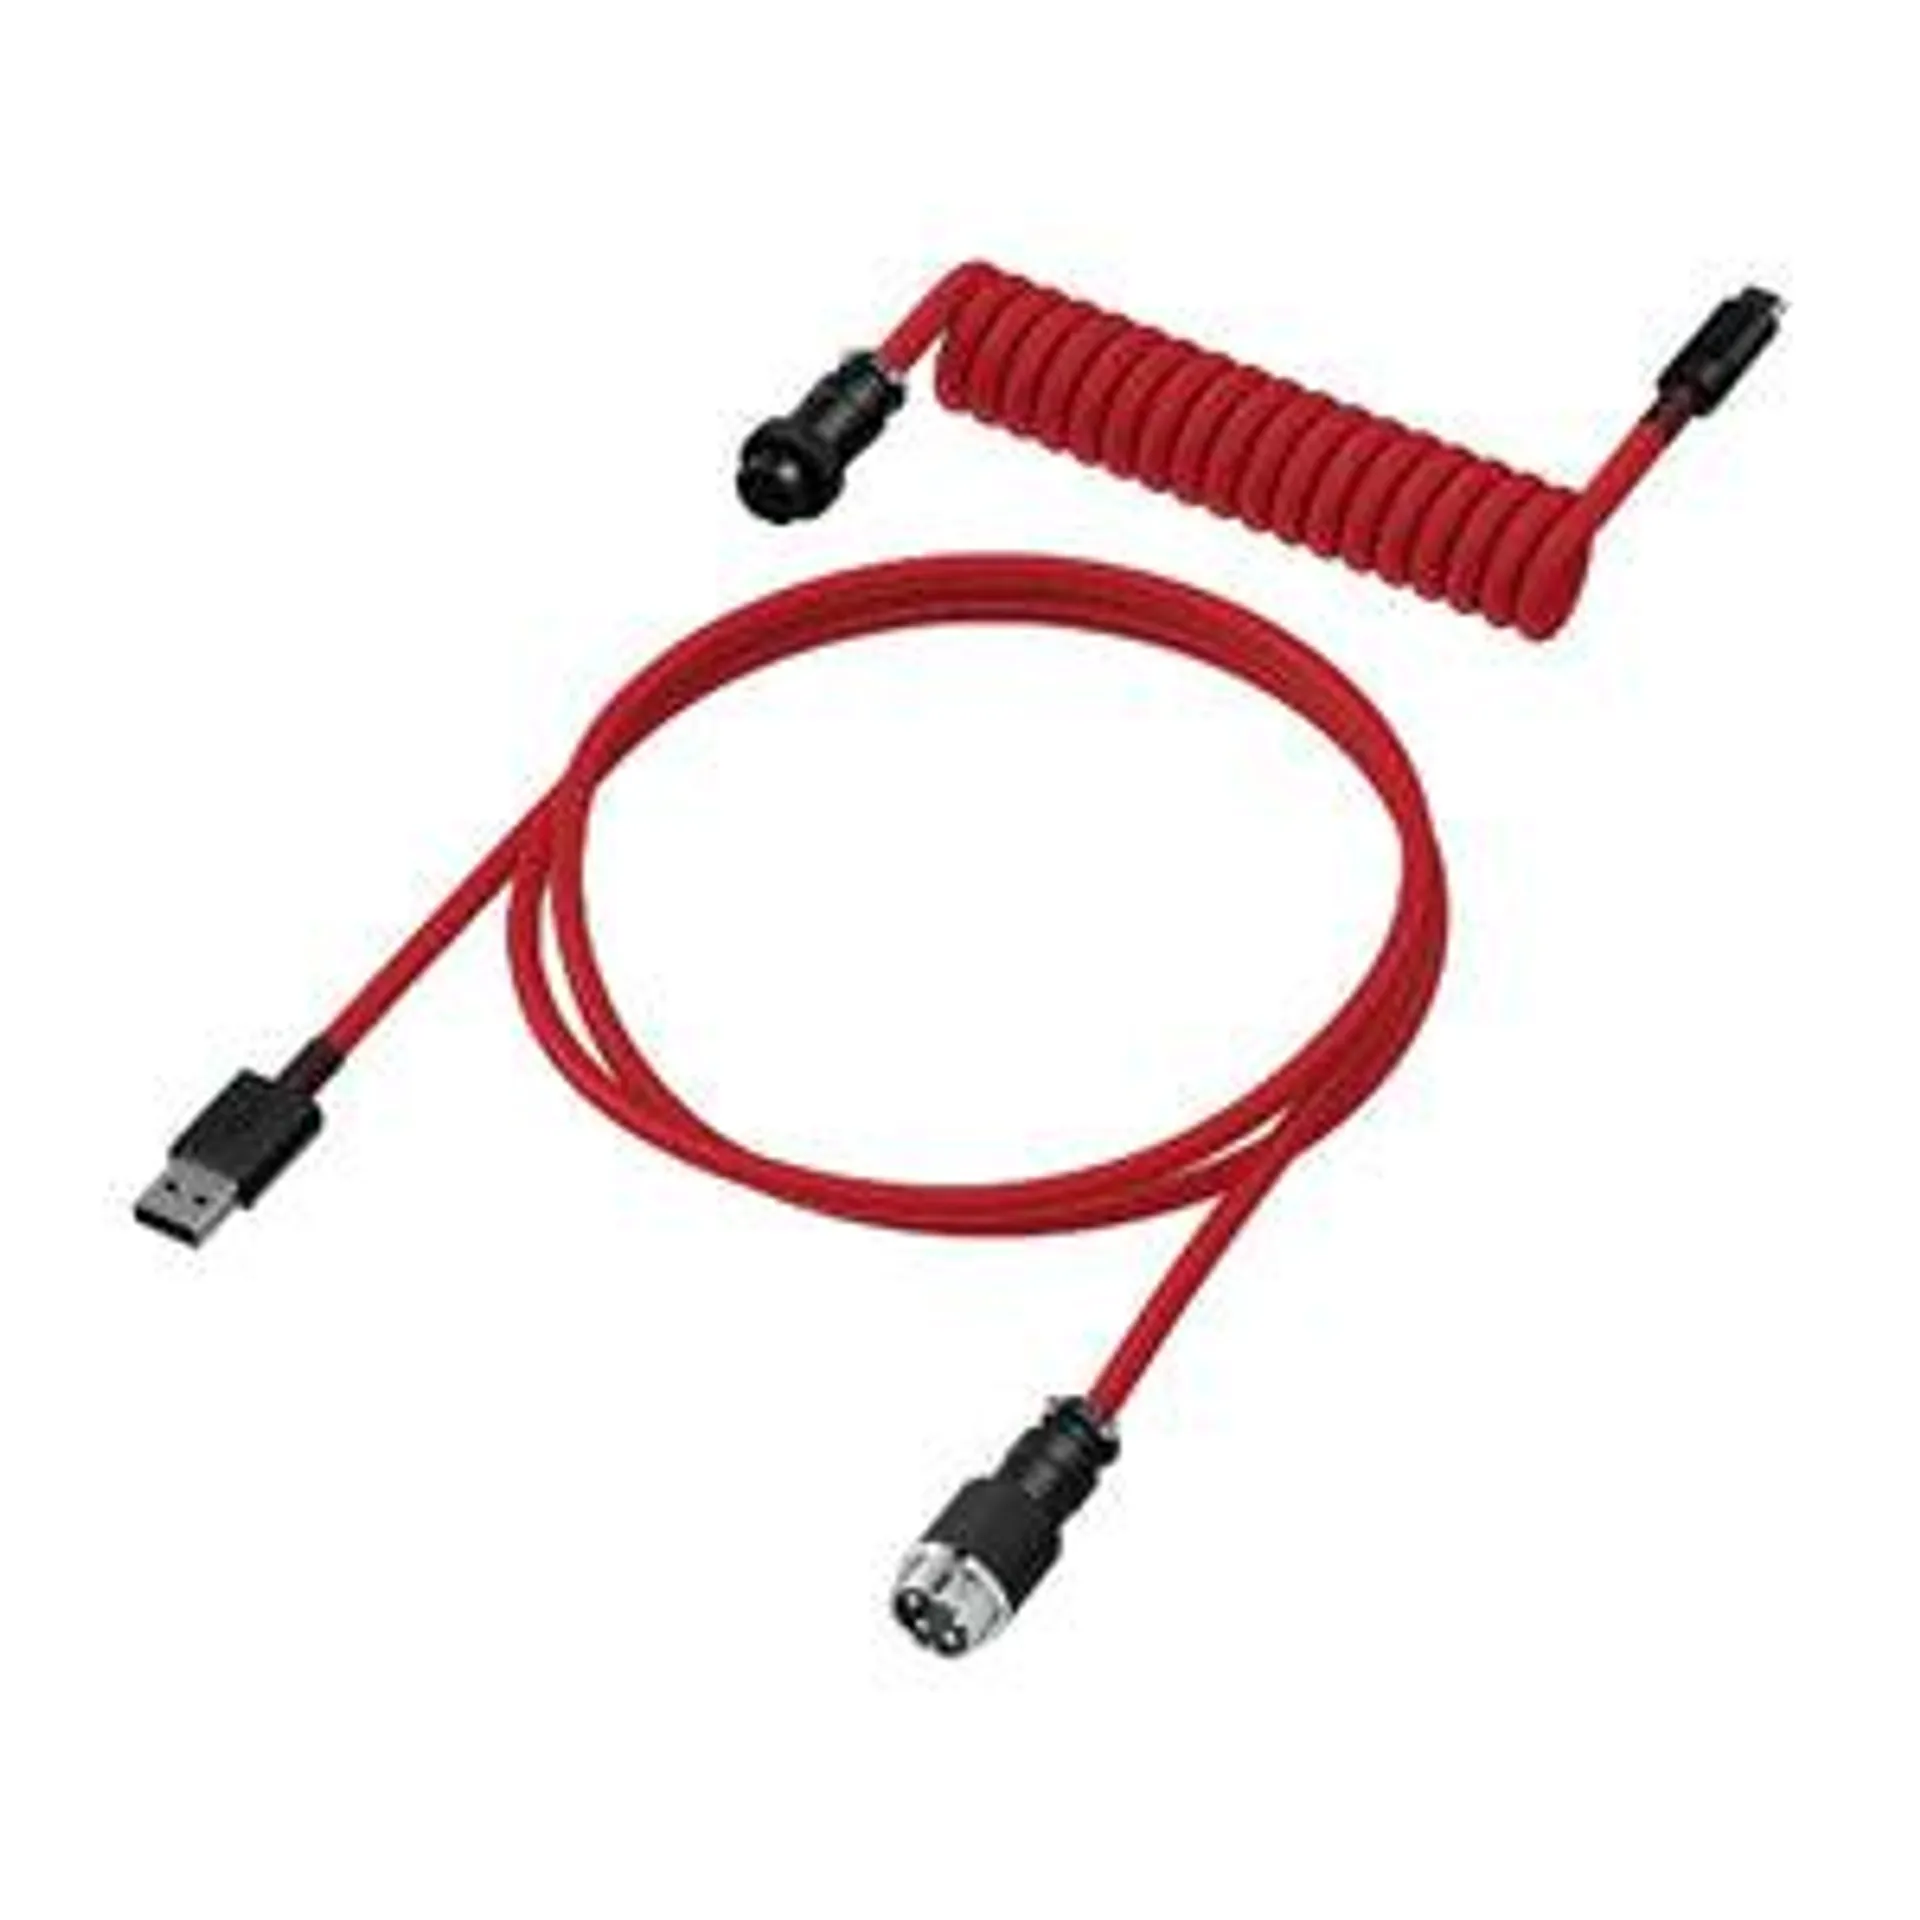 HyperX Coiled Cable